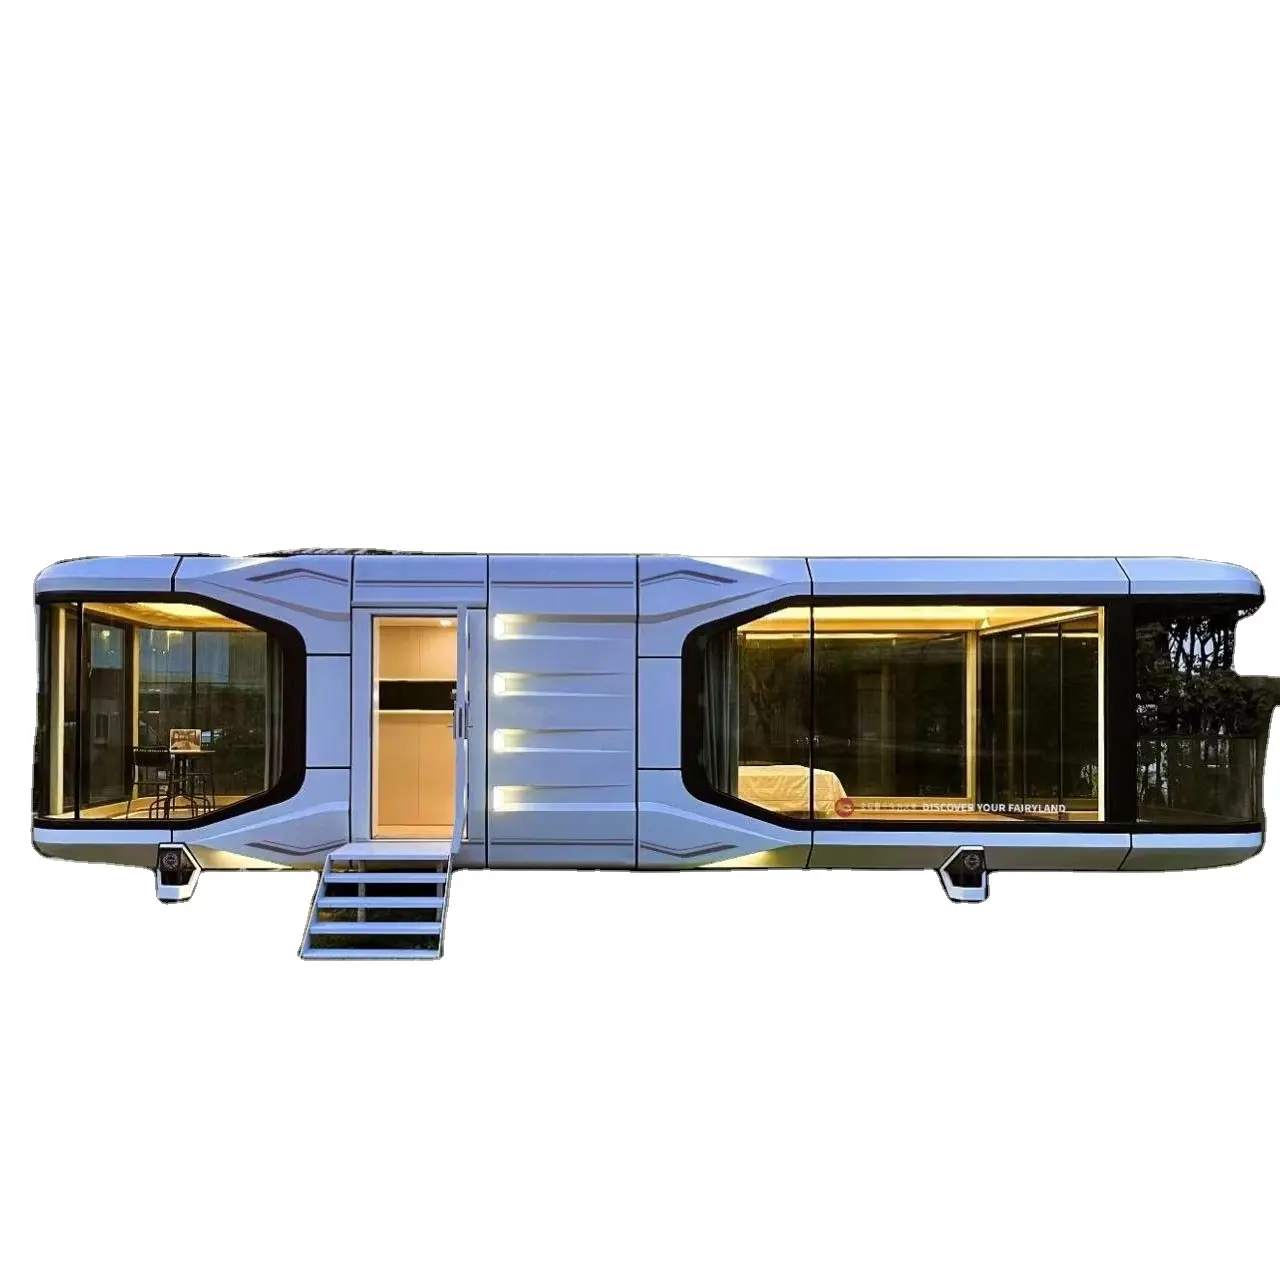 Prefab House Capsule Bed Hotel Cabin Prefab Cabin Space Capsule Container Houses for Sale in Kenya Free Sample Container Houses